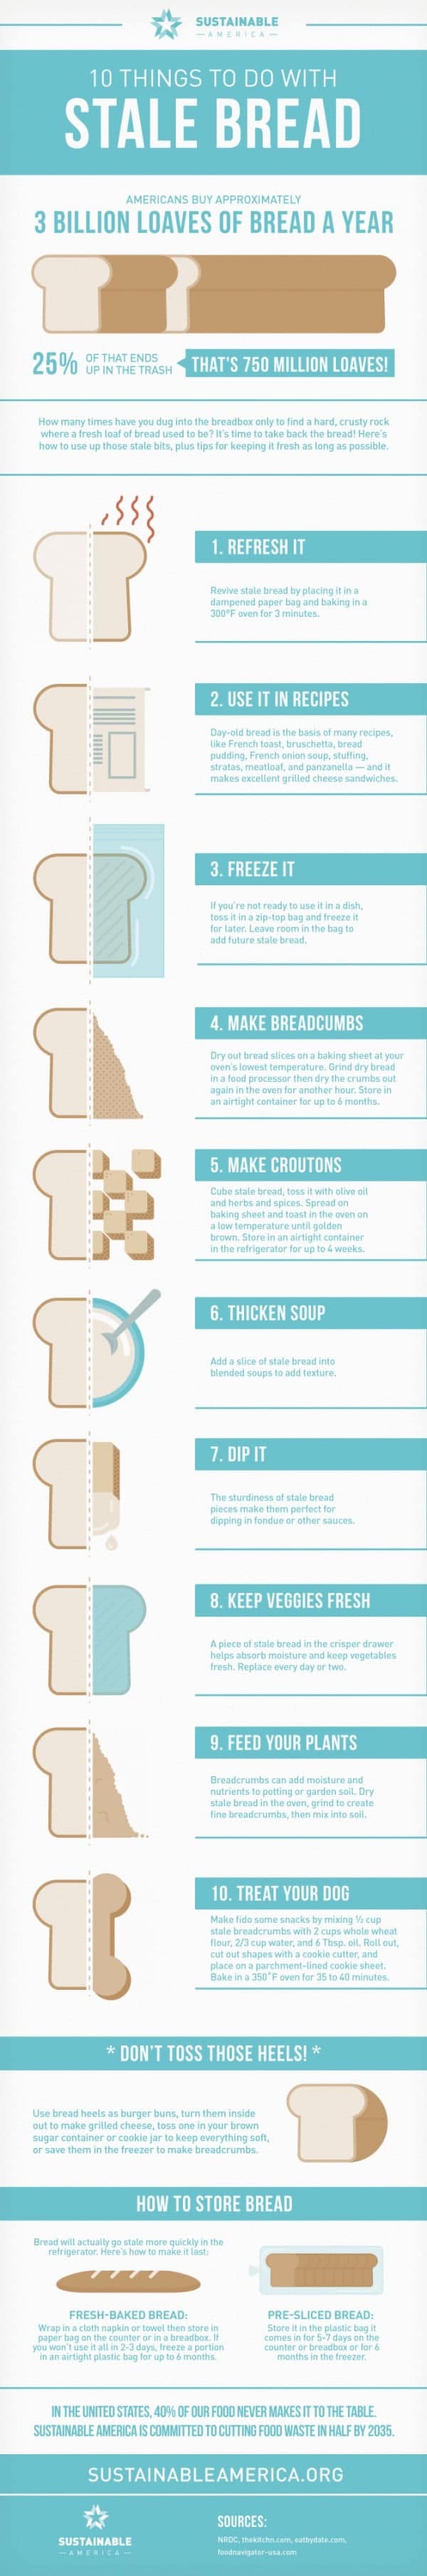 10 Things To Do With Stale Bread Infographic